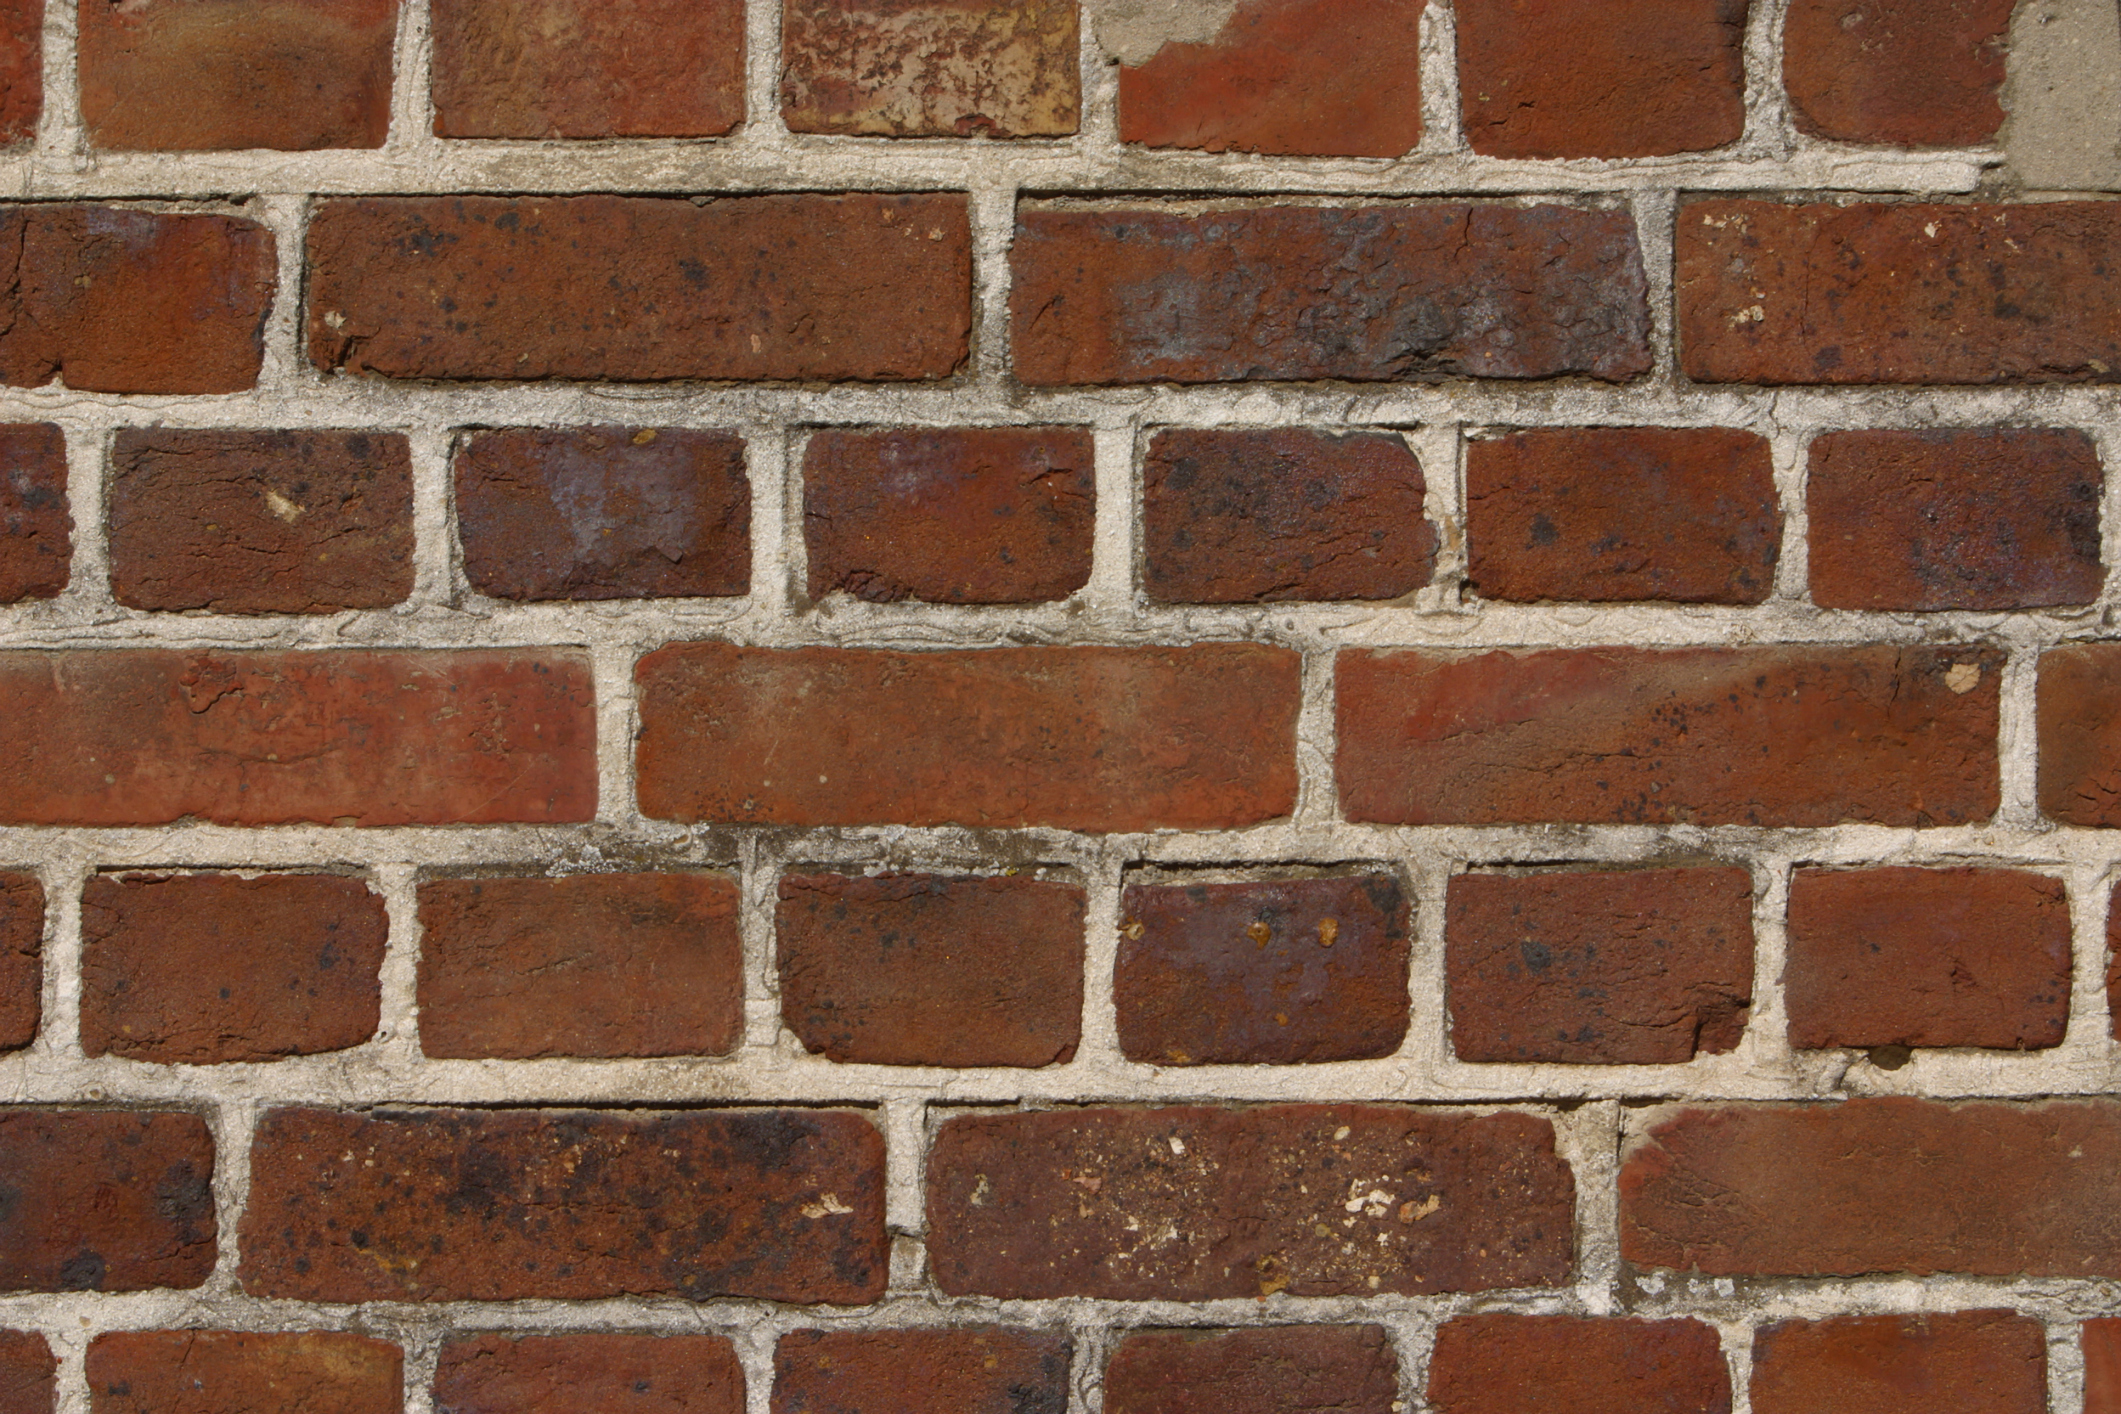 How To Remove Construction Adhesive From Brick